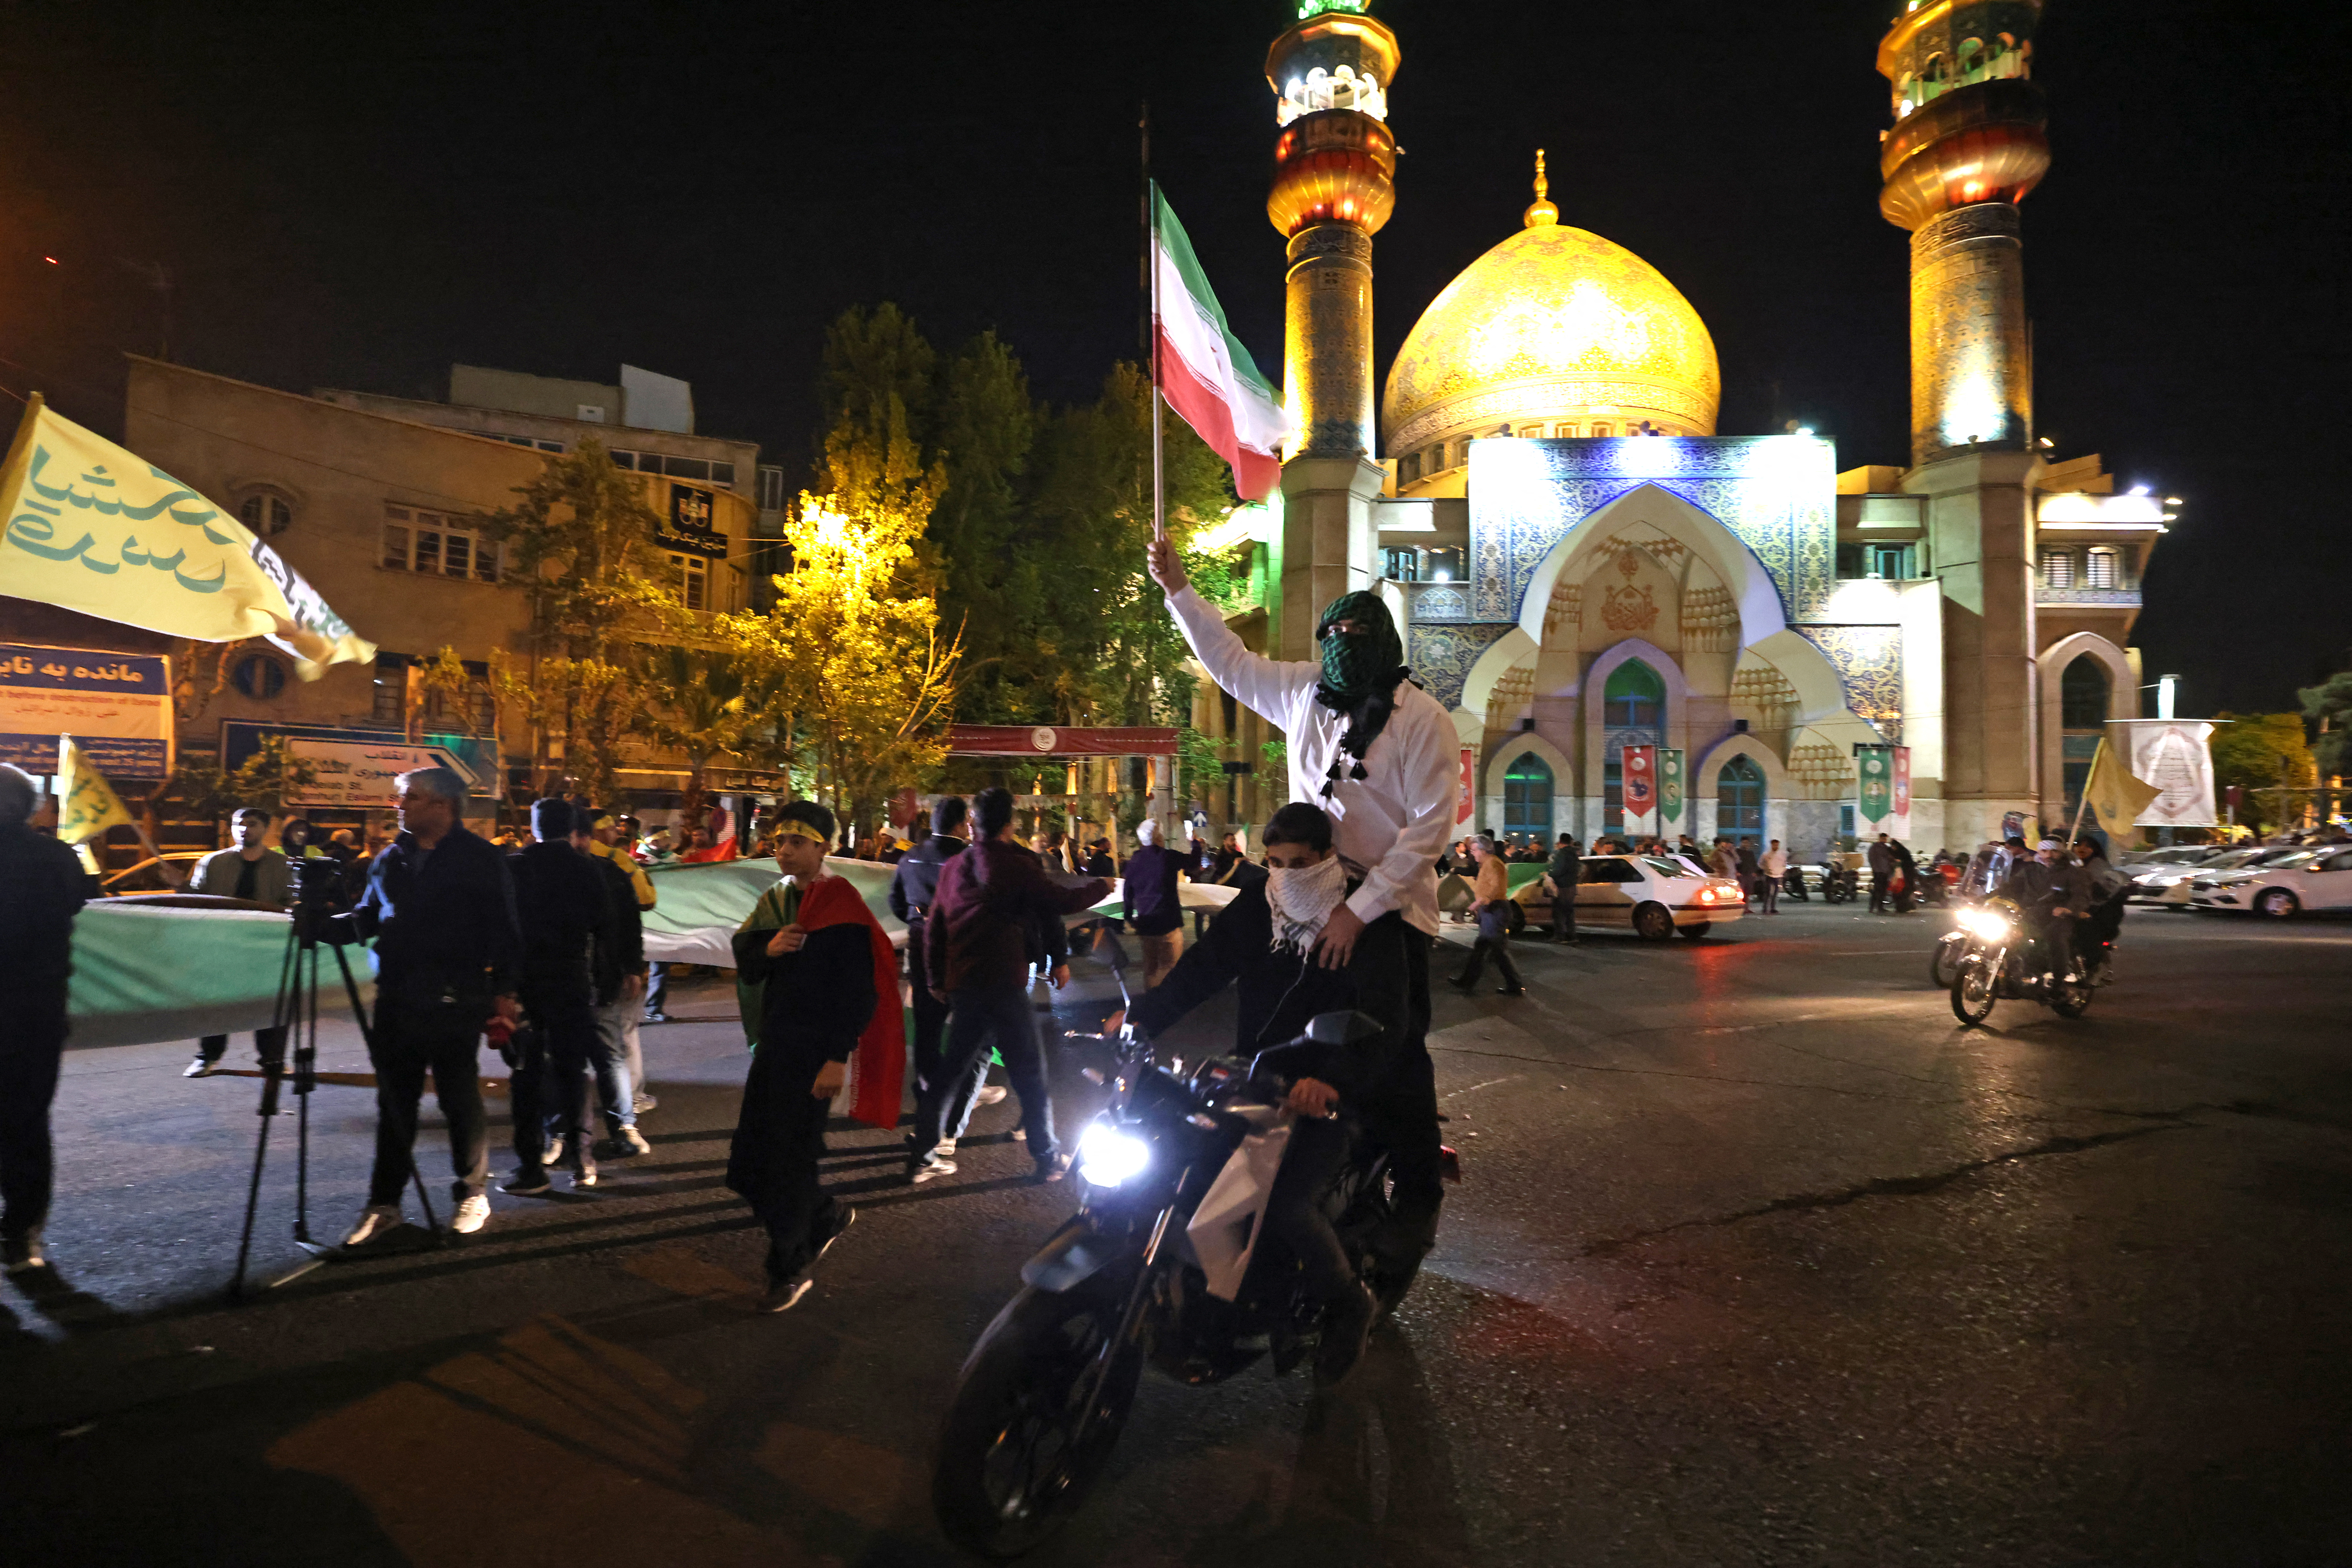 Demonstrators wave Iran's flag as they gather at Palestine Square in Tehran on April 14, after Iran launched a drone and missile attack on Israel.